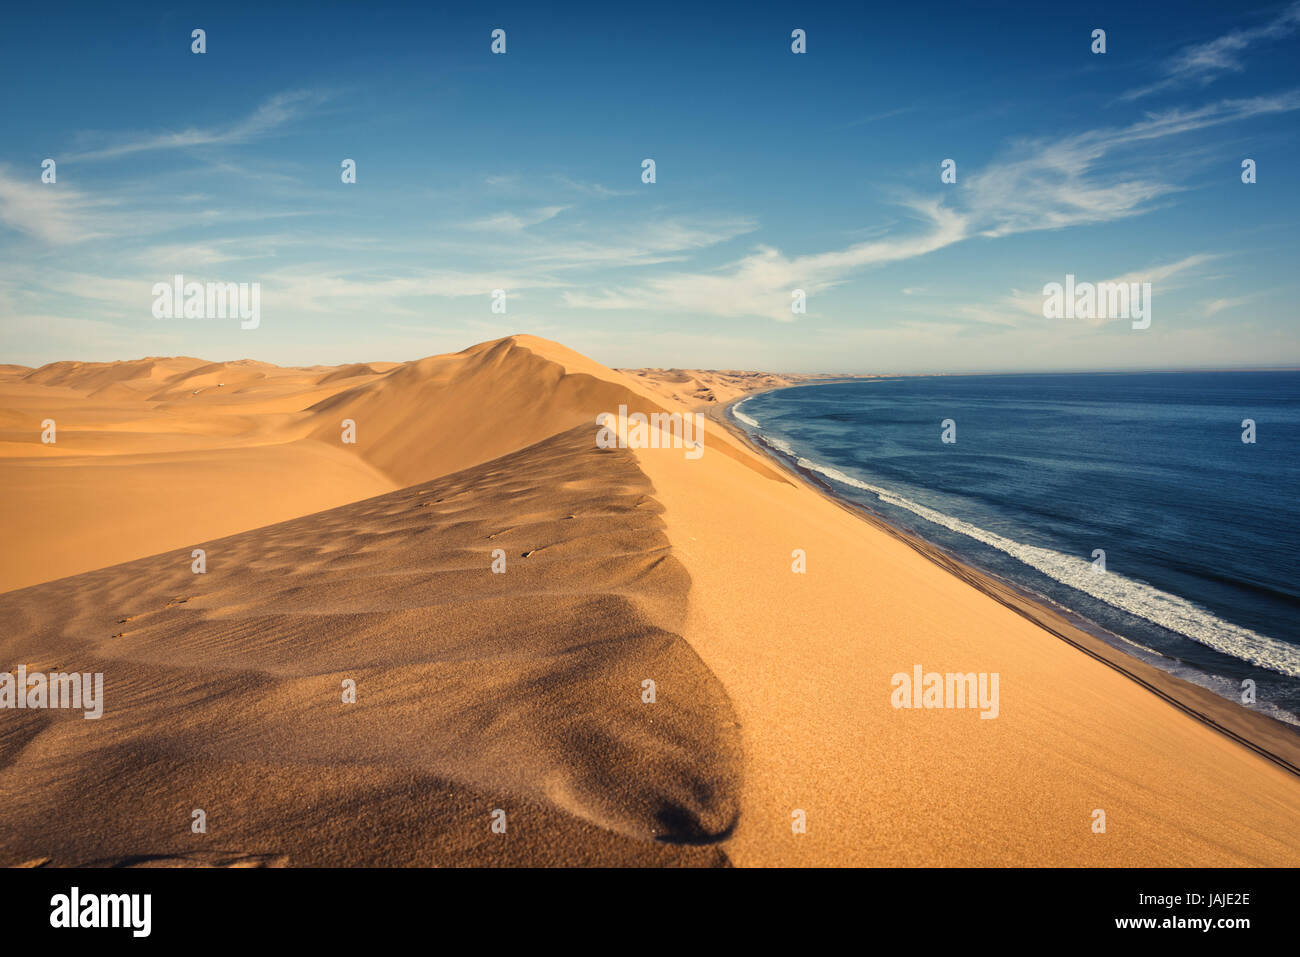 The Namib Desert at Sandwhich Harbour in Namibia Stock Photo